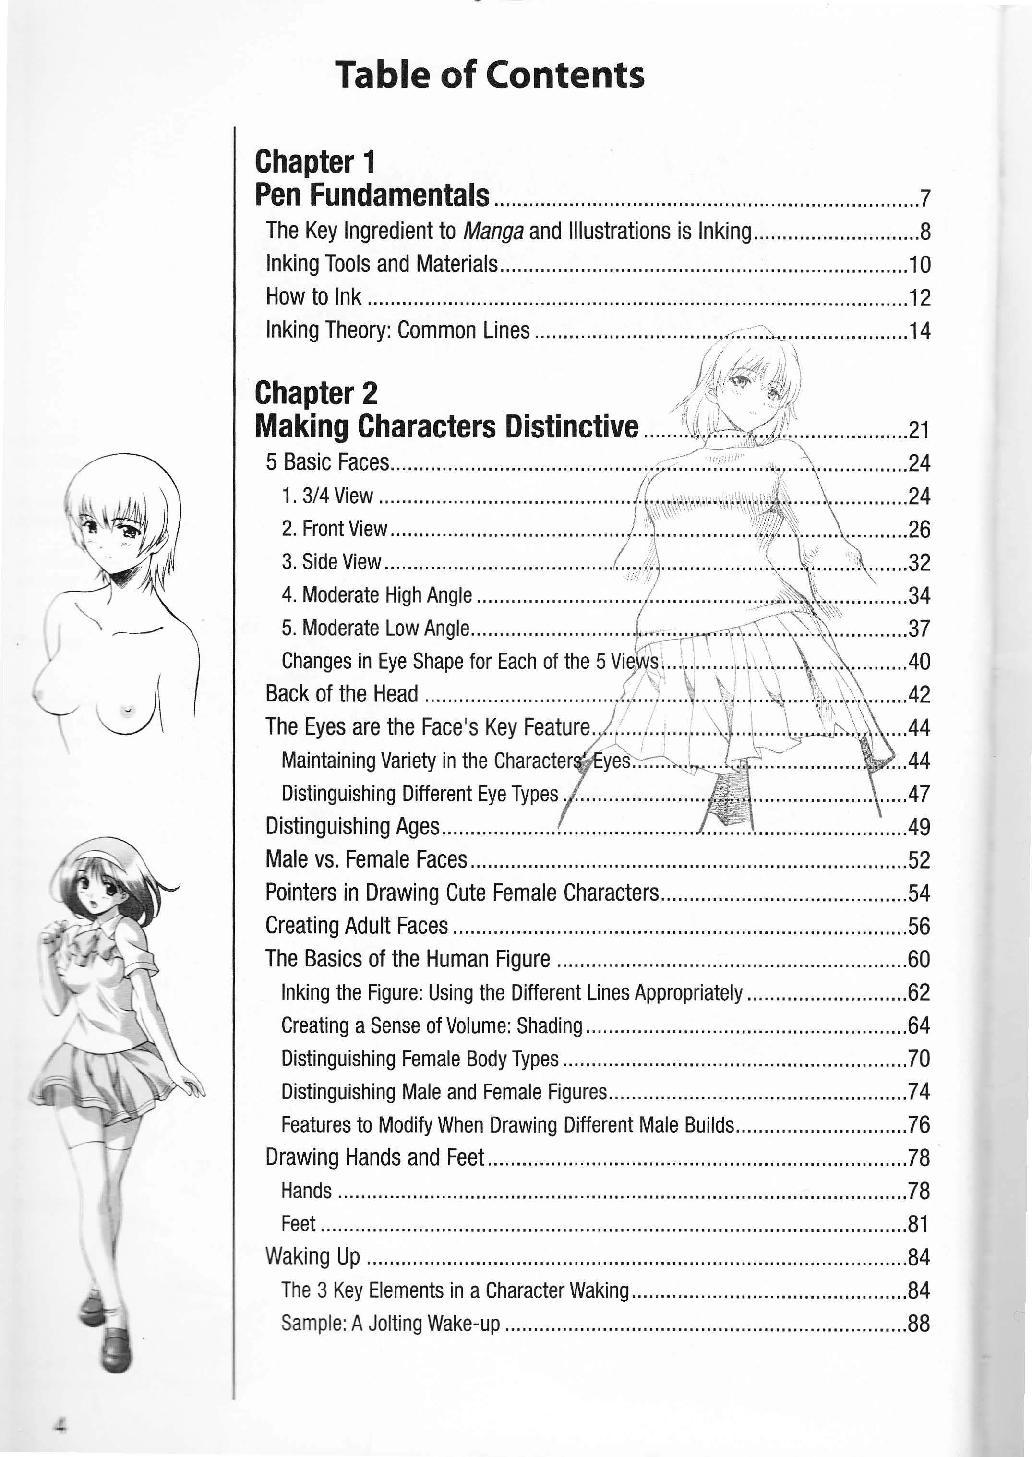 More How to Draw Manga Vol. 2 - Penning Characters 5